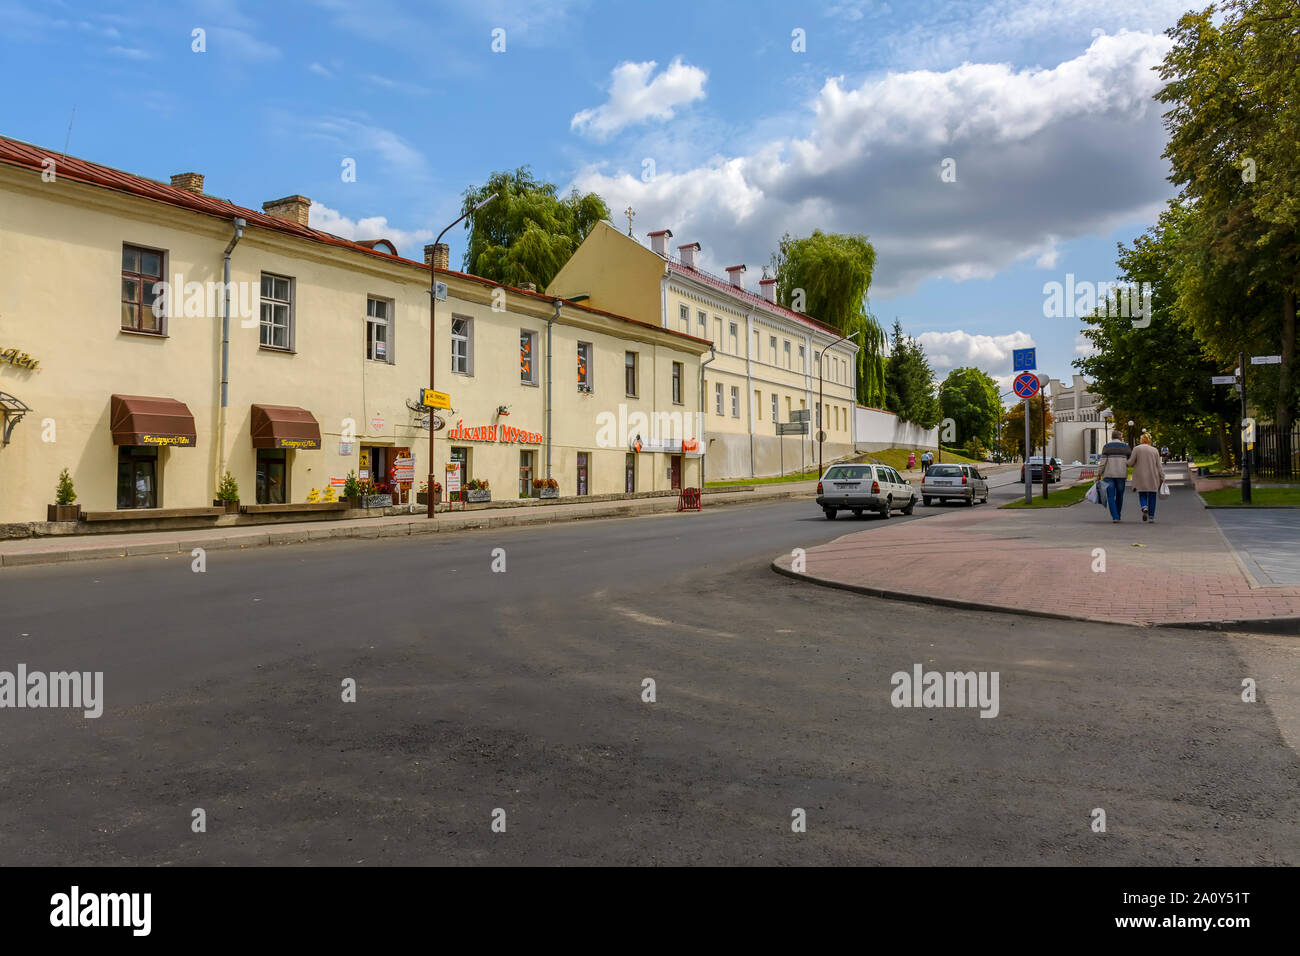 Castle street. Grodno, Belarus. 04 August 2019 .Castle street, one of the oldest city streets in the center of Grodno. It is one of the symbols of the Stock Photo